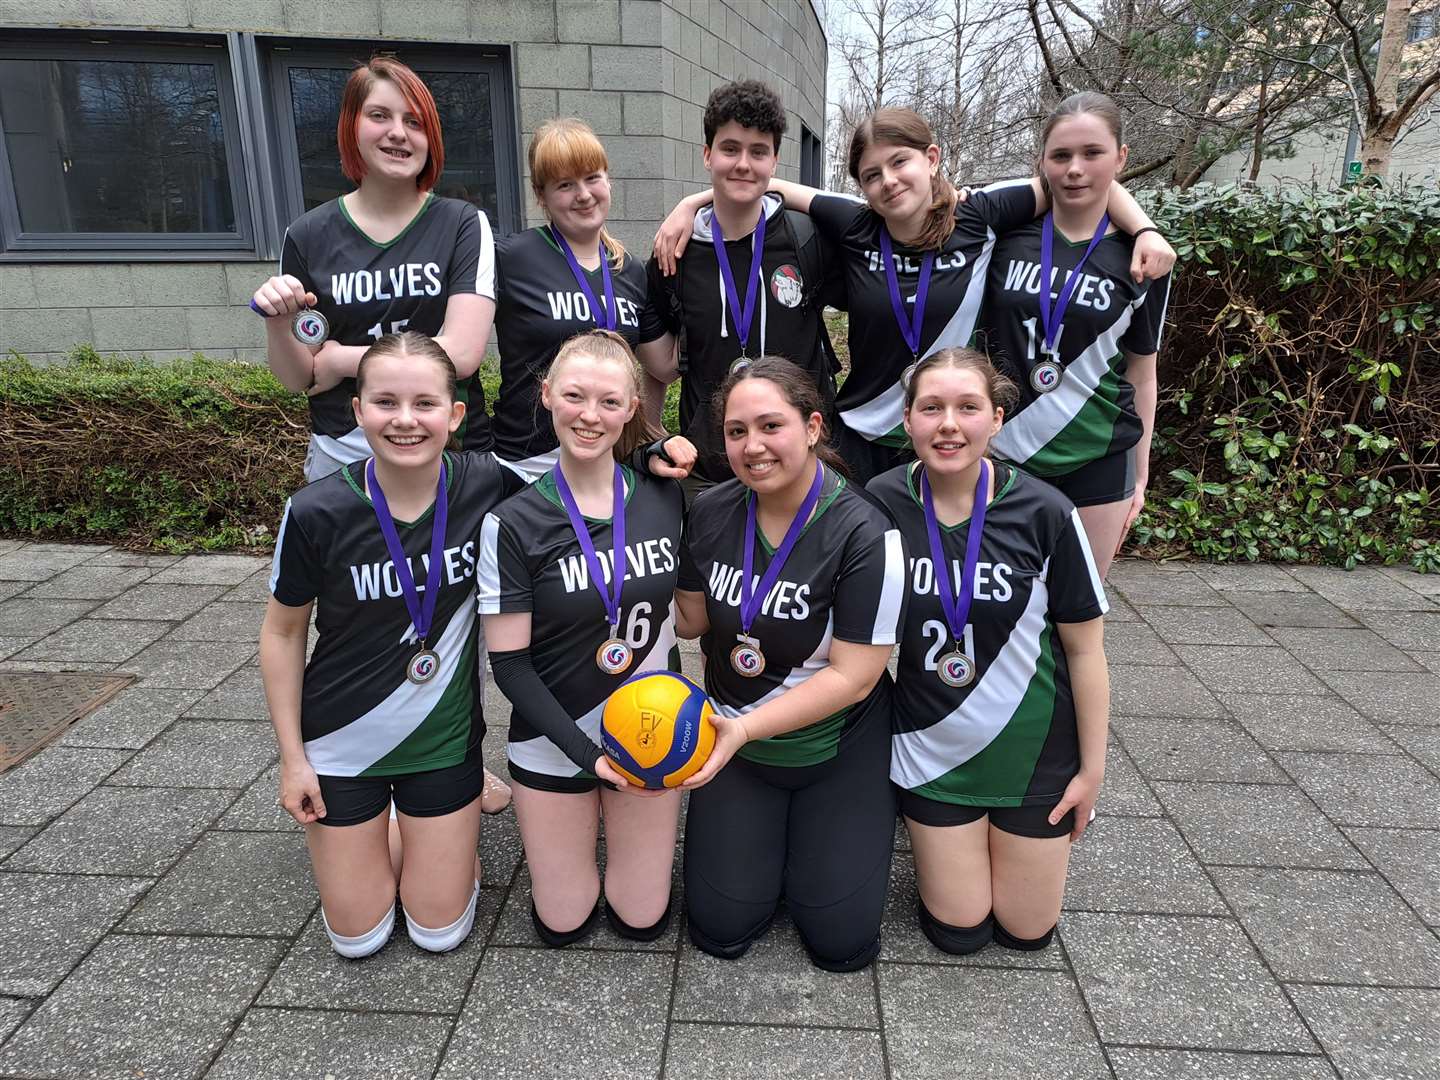 The Forres Solstice Wolves team who won the Scottish Plate, back row, from left: Emi Lake, Holly Innes, Will Custodio, Aimee Horne and Lucy Fraser. Front: Holly Gray, Grace Mackie, Georgia Browne, and Emily Simpson.